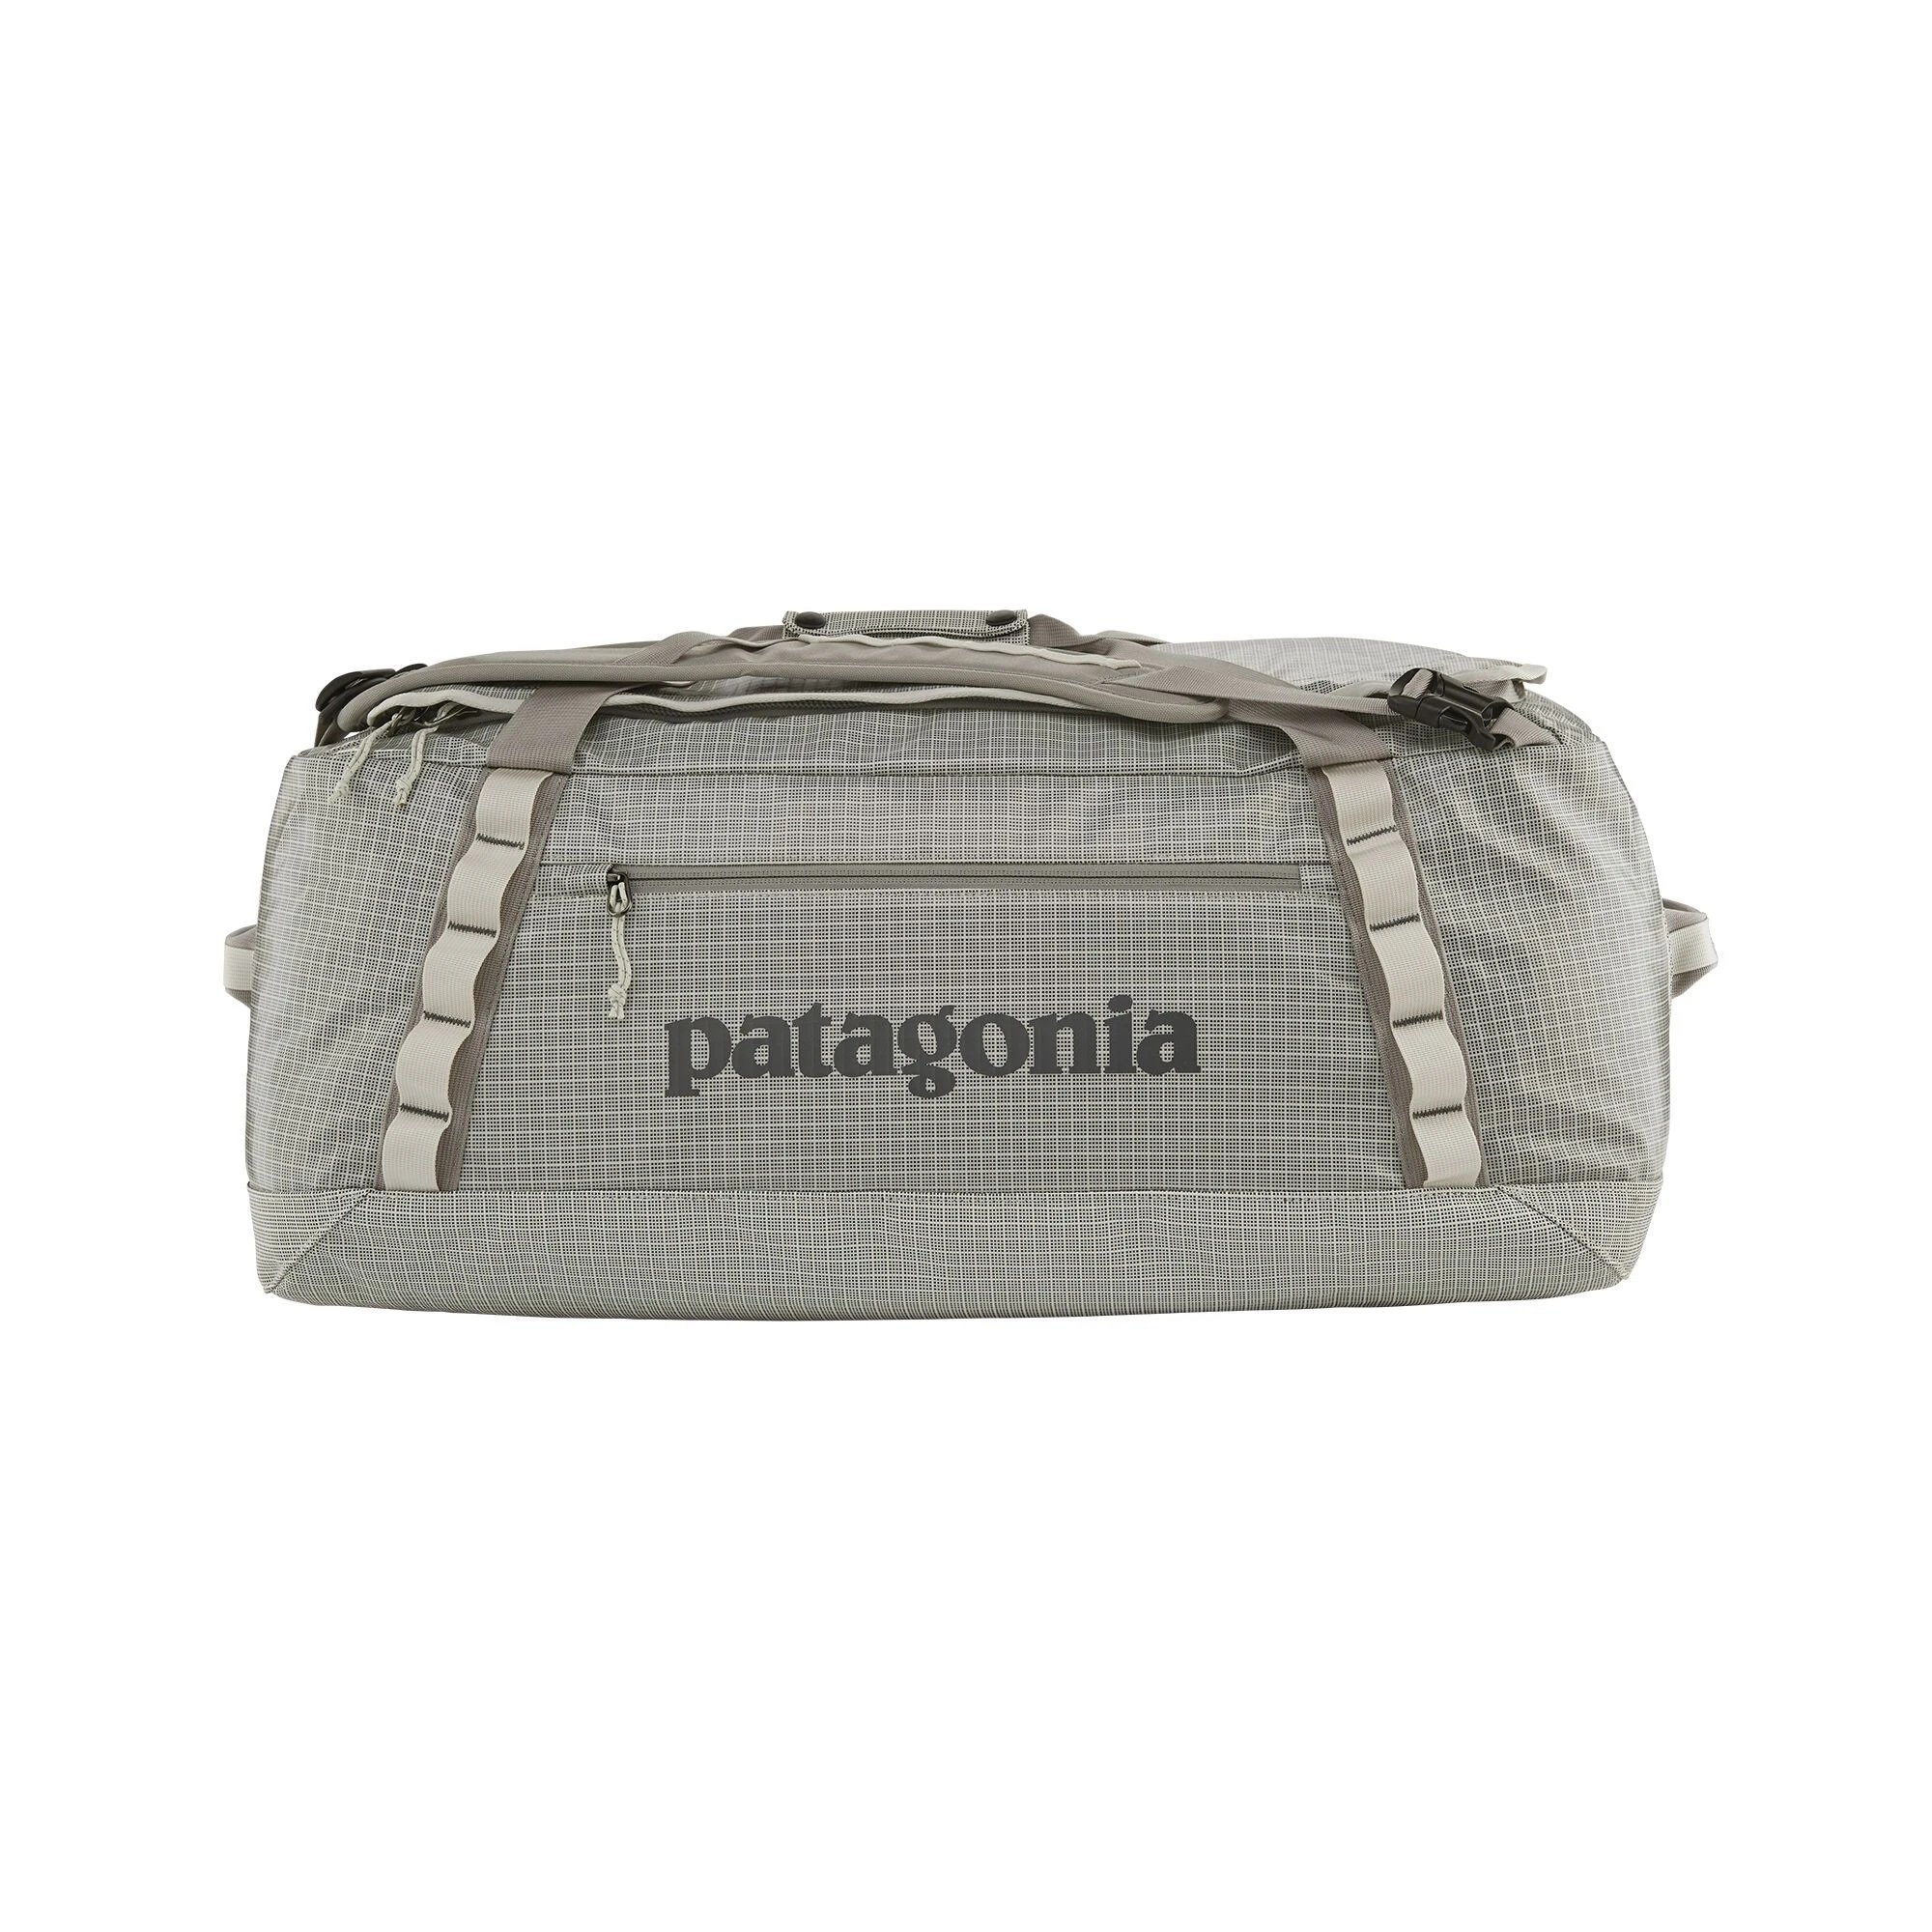 Patagonia Black Hole Duffel Bag 55L - 100 % Recycled Polyester, Birch White